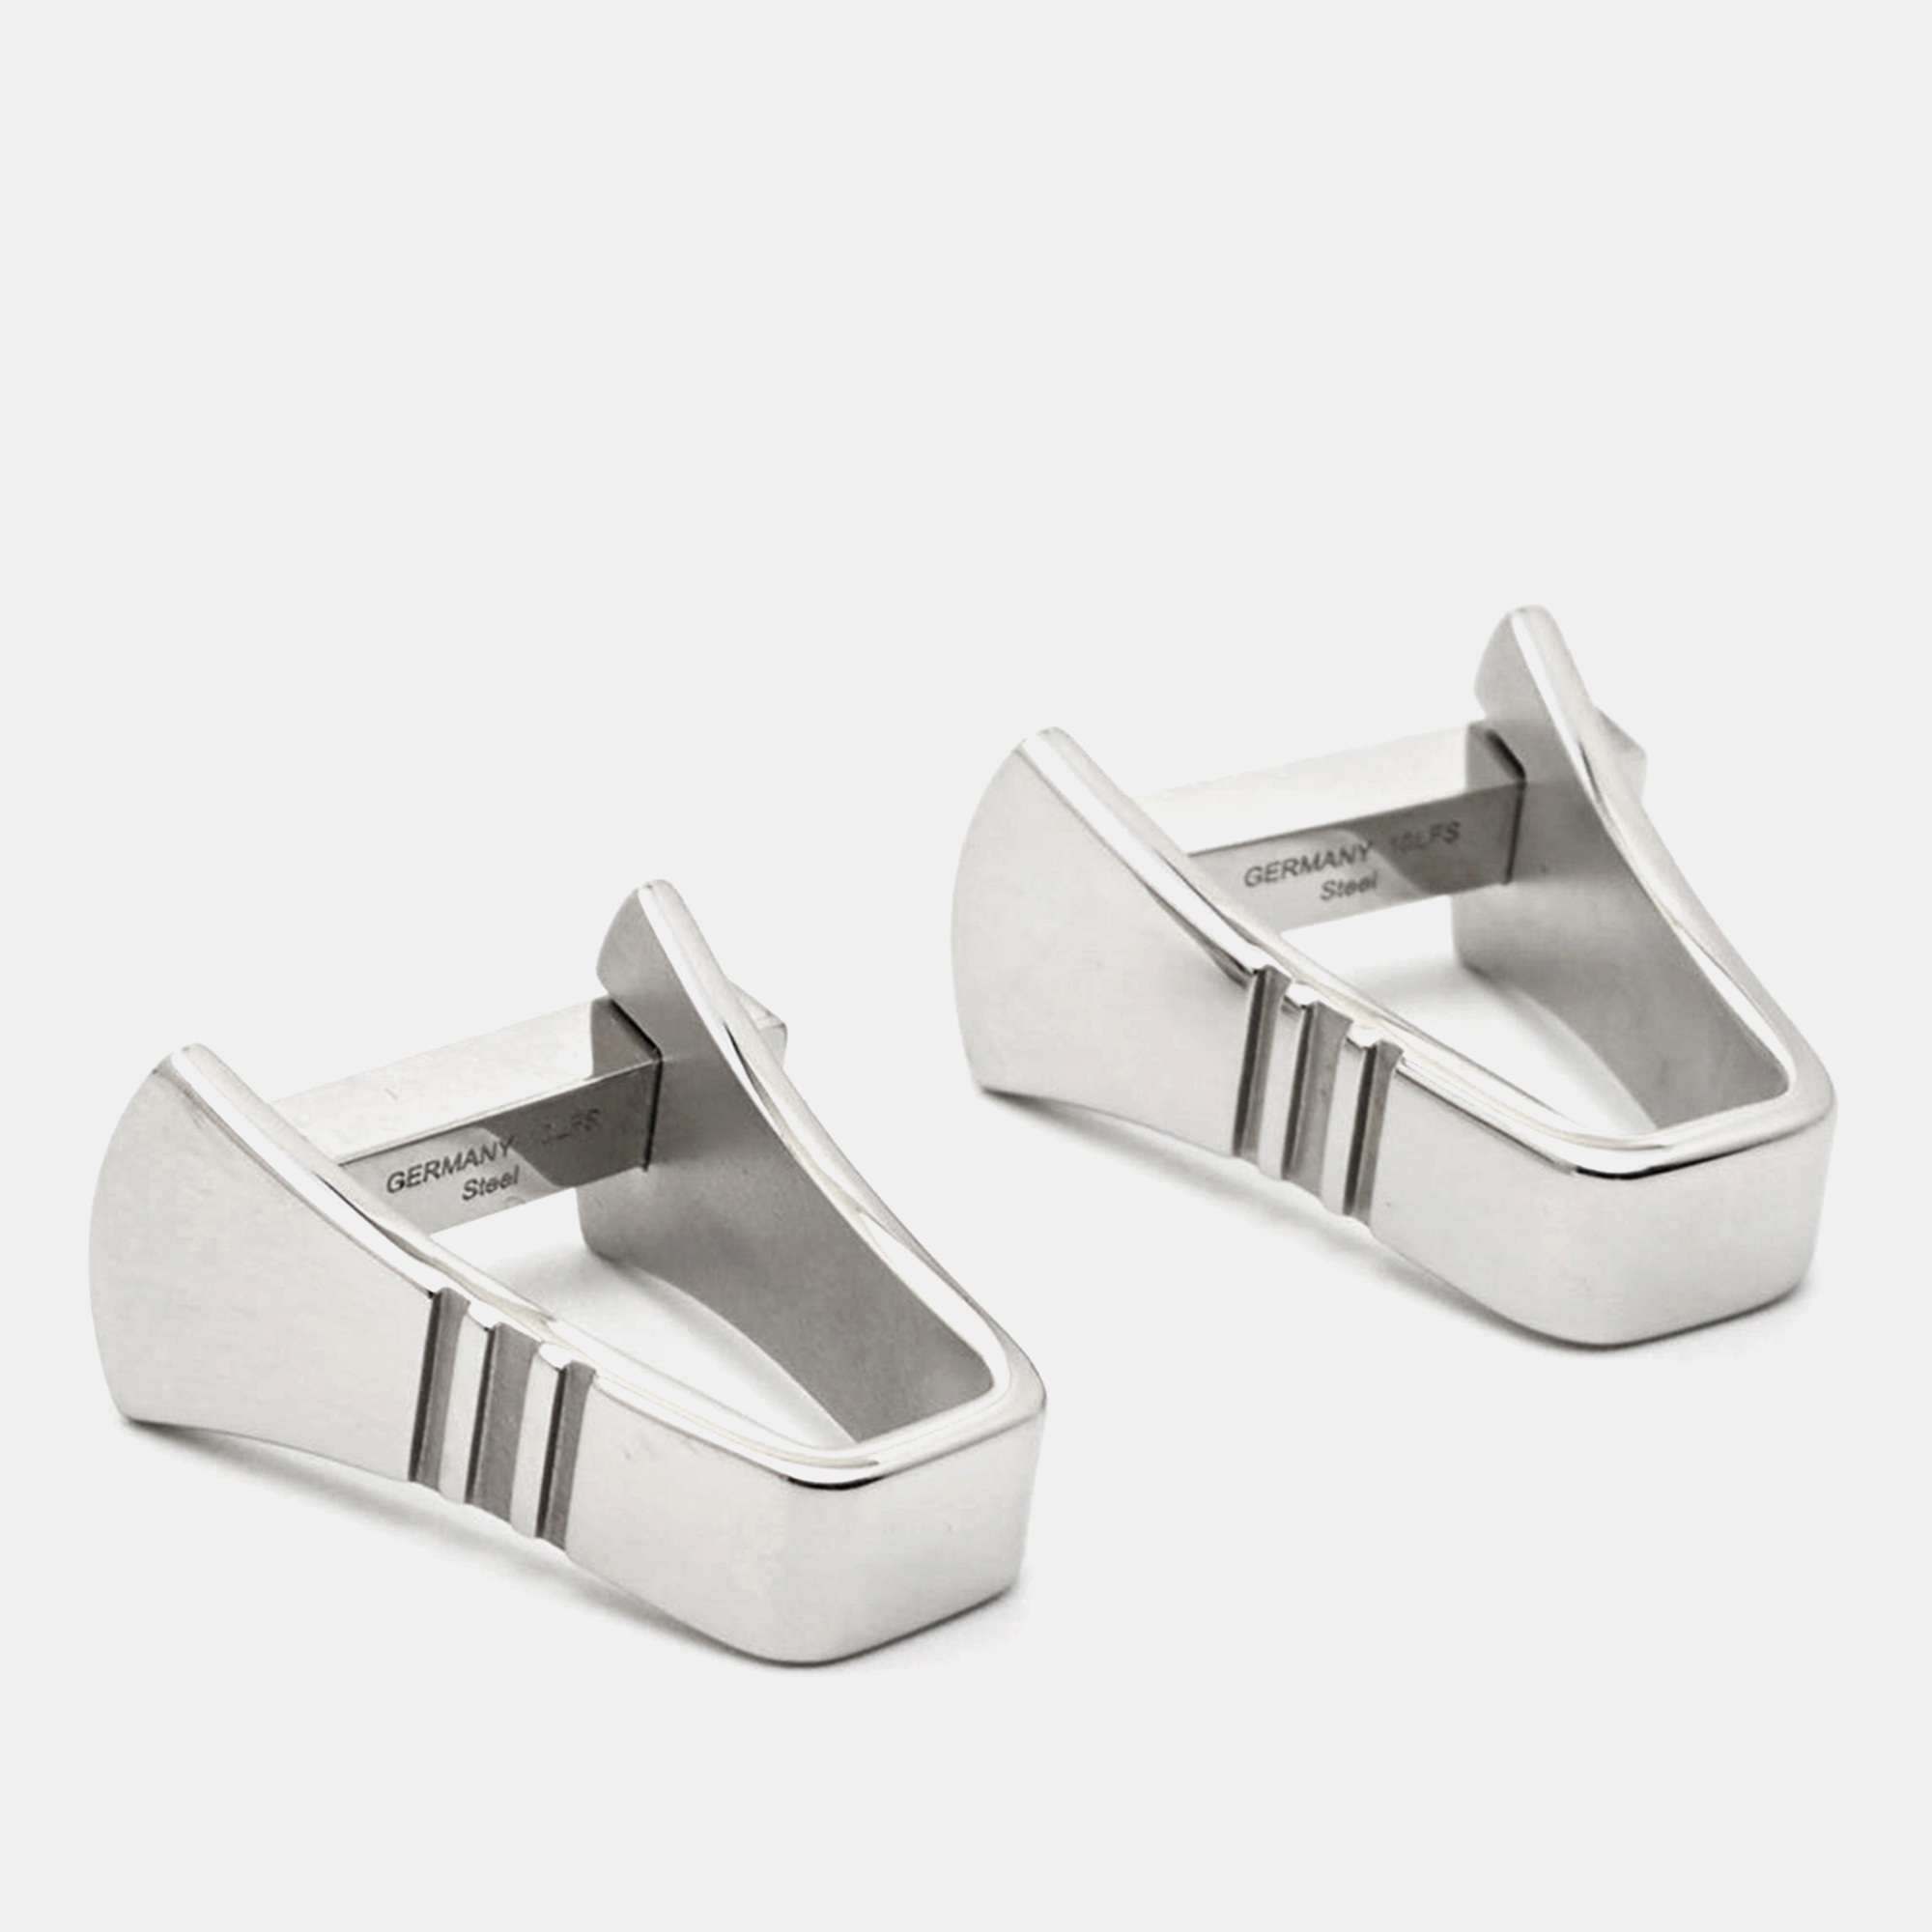 Pre-owned Montblanc Sartorial Silver Tone Cufflinks